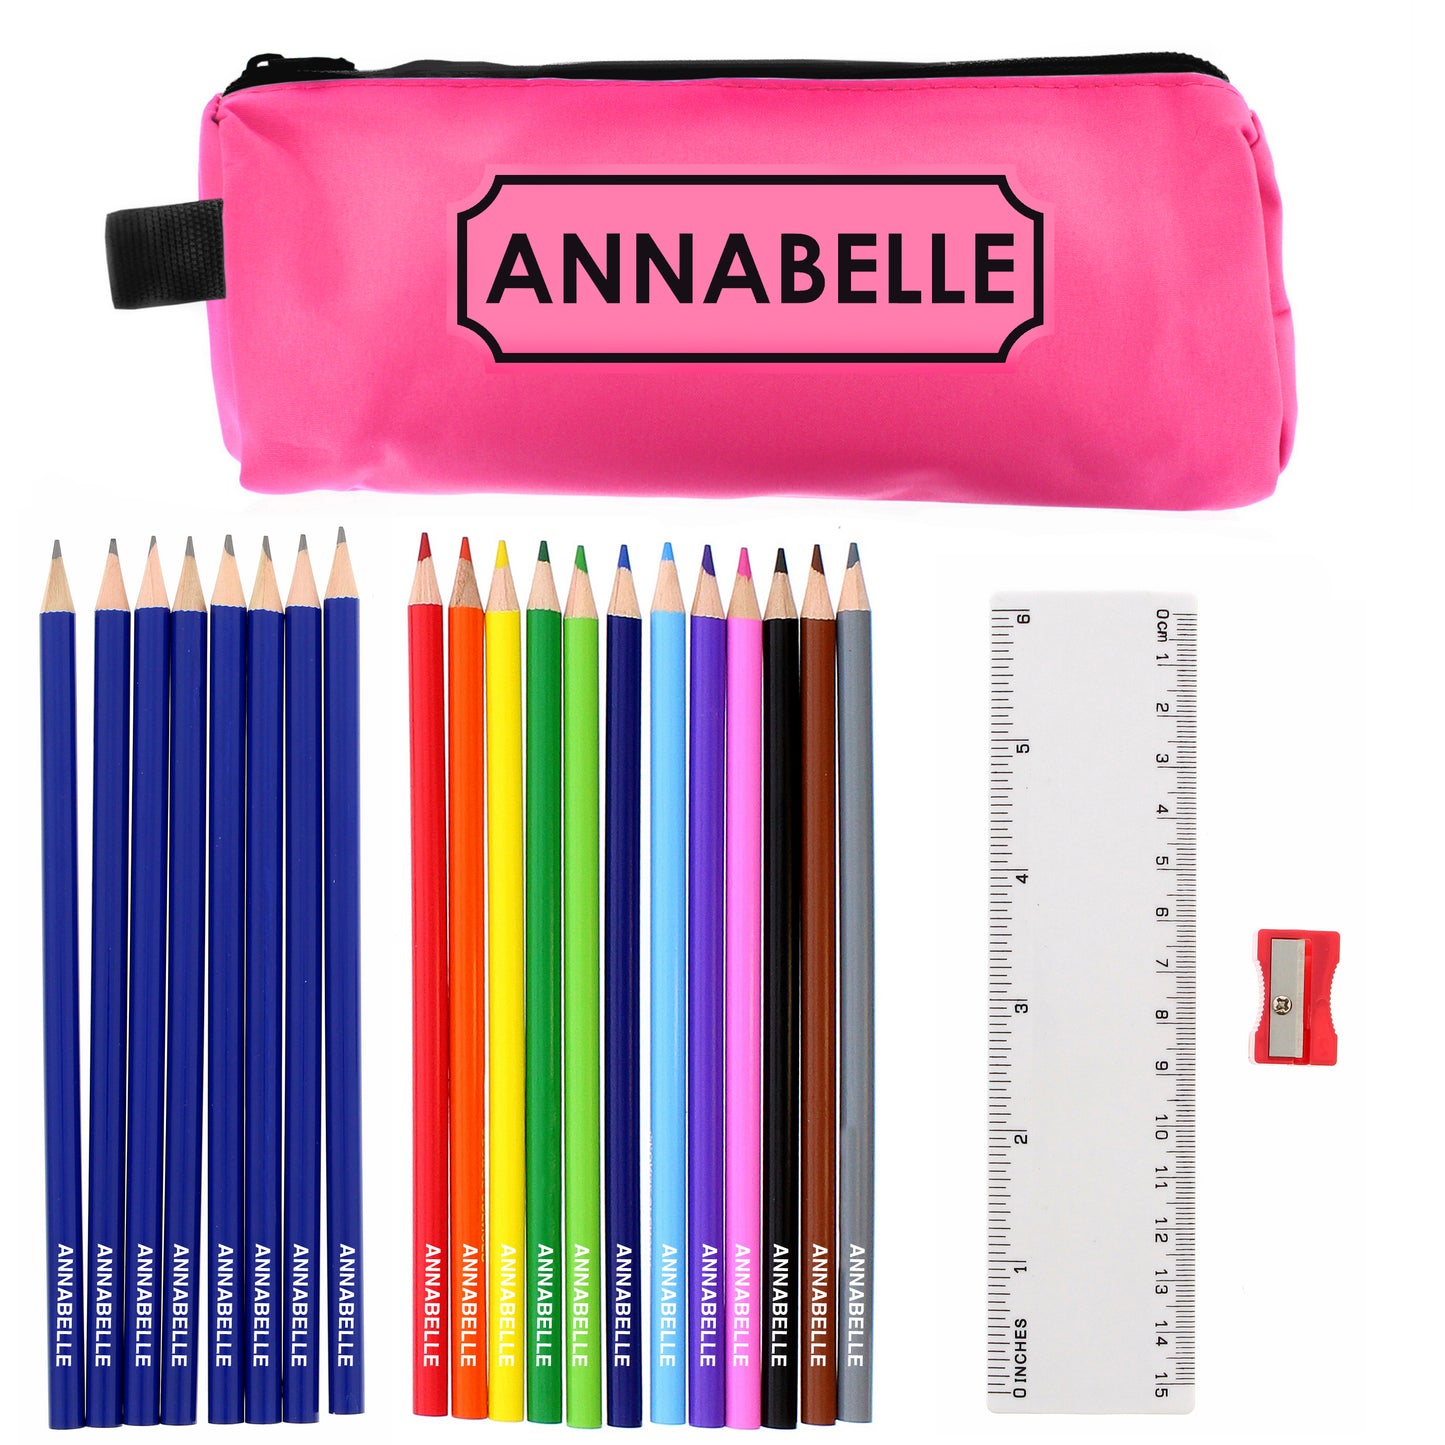 Personalised Pink Pencil Case with Pencils & Crayons